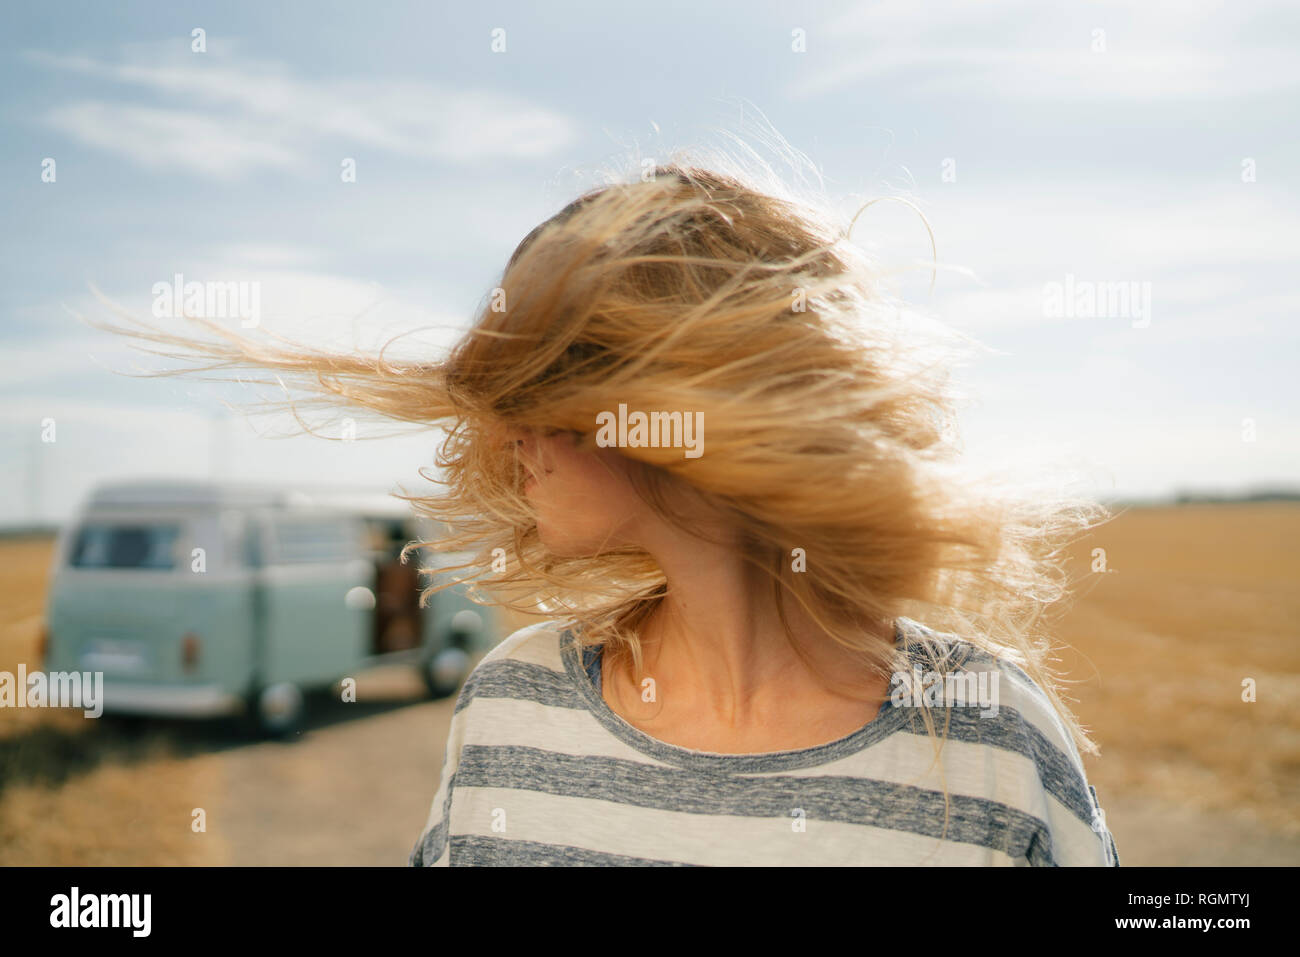 Blong young woman at camper van in rural landscape shaking her hair Stock Photo